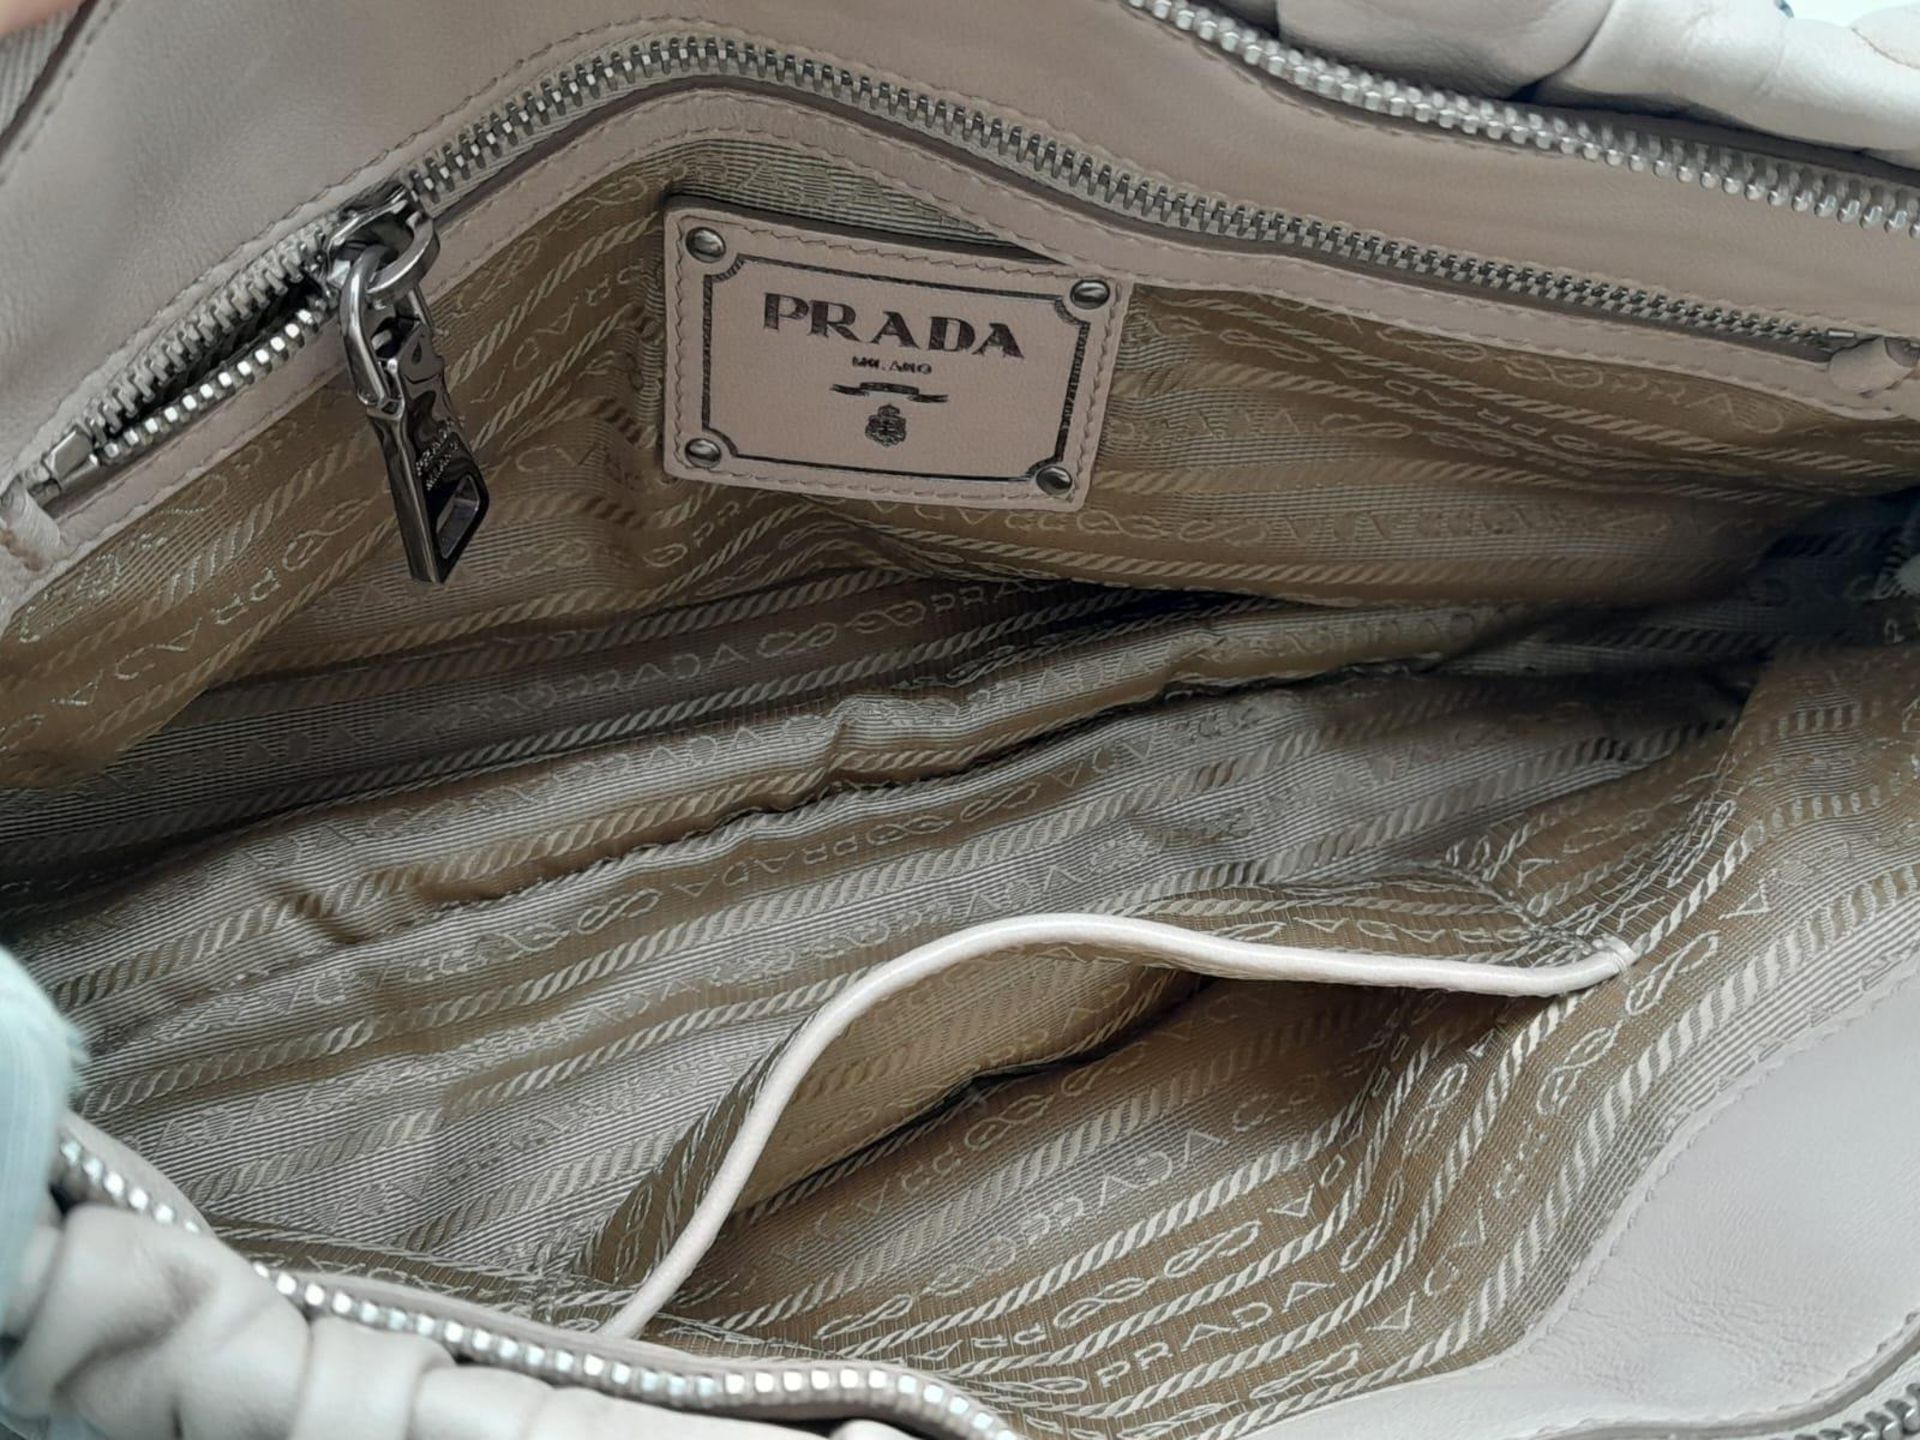 A PRADA BEIGE NAPPA LEATHER GAUFRE POMICE TOTE BAG. SILVER TONE HARD WEAR INCLUDING BUCKLE DETAIL. - Image 25 of 27